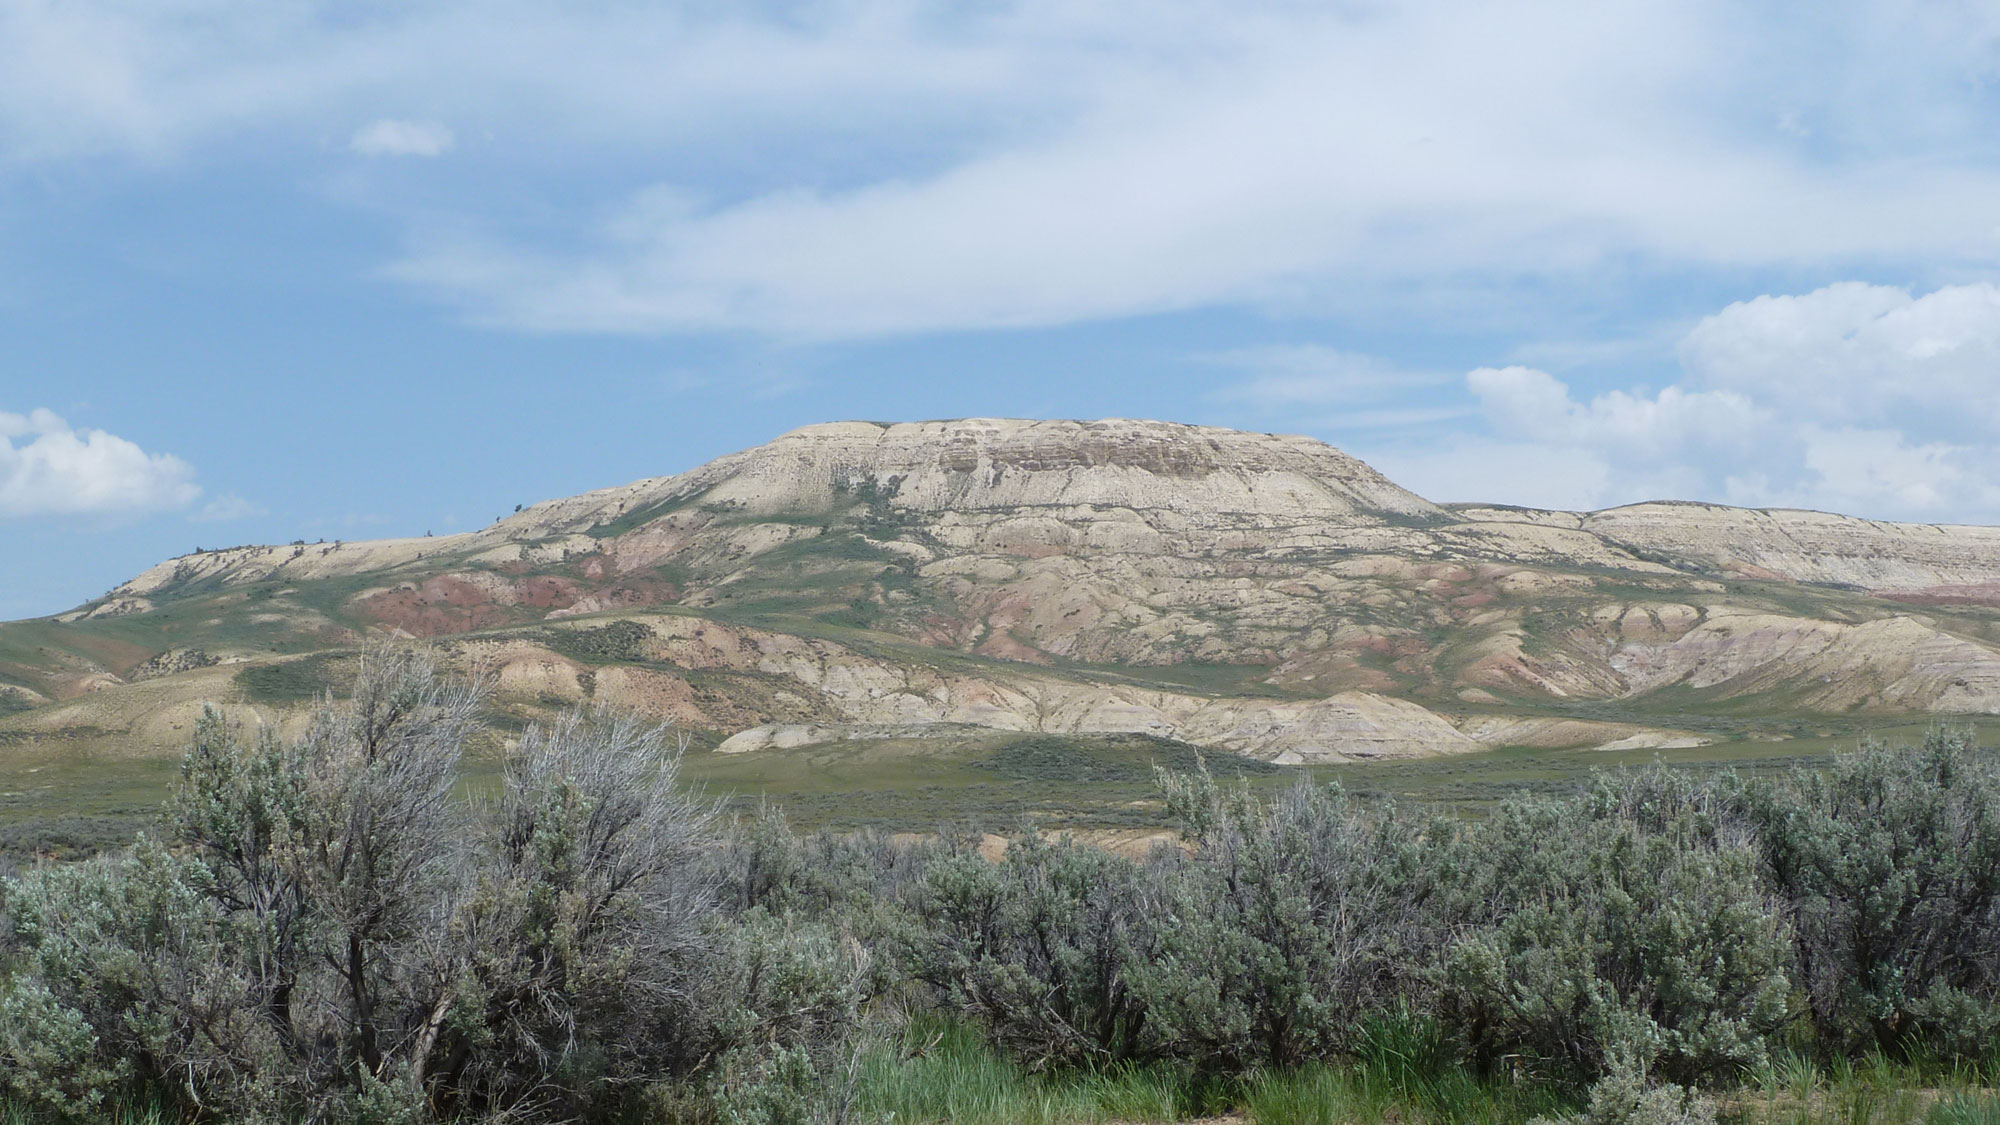 Photograph of a butte at Fossil Butte National Monument, Wyoming. The photo shows a flat-topped hill rising above the landscape. The hill is made up of off-white rock at its top. The sides are of off white rock and some red rock. Near the top of the hill, there is little vegetation. The slopes have some green vegetation. Shrubs can be seen in the foreground.